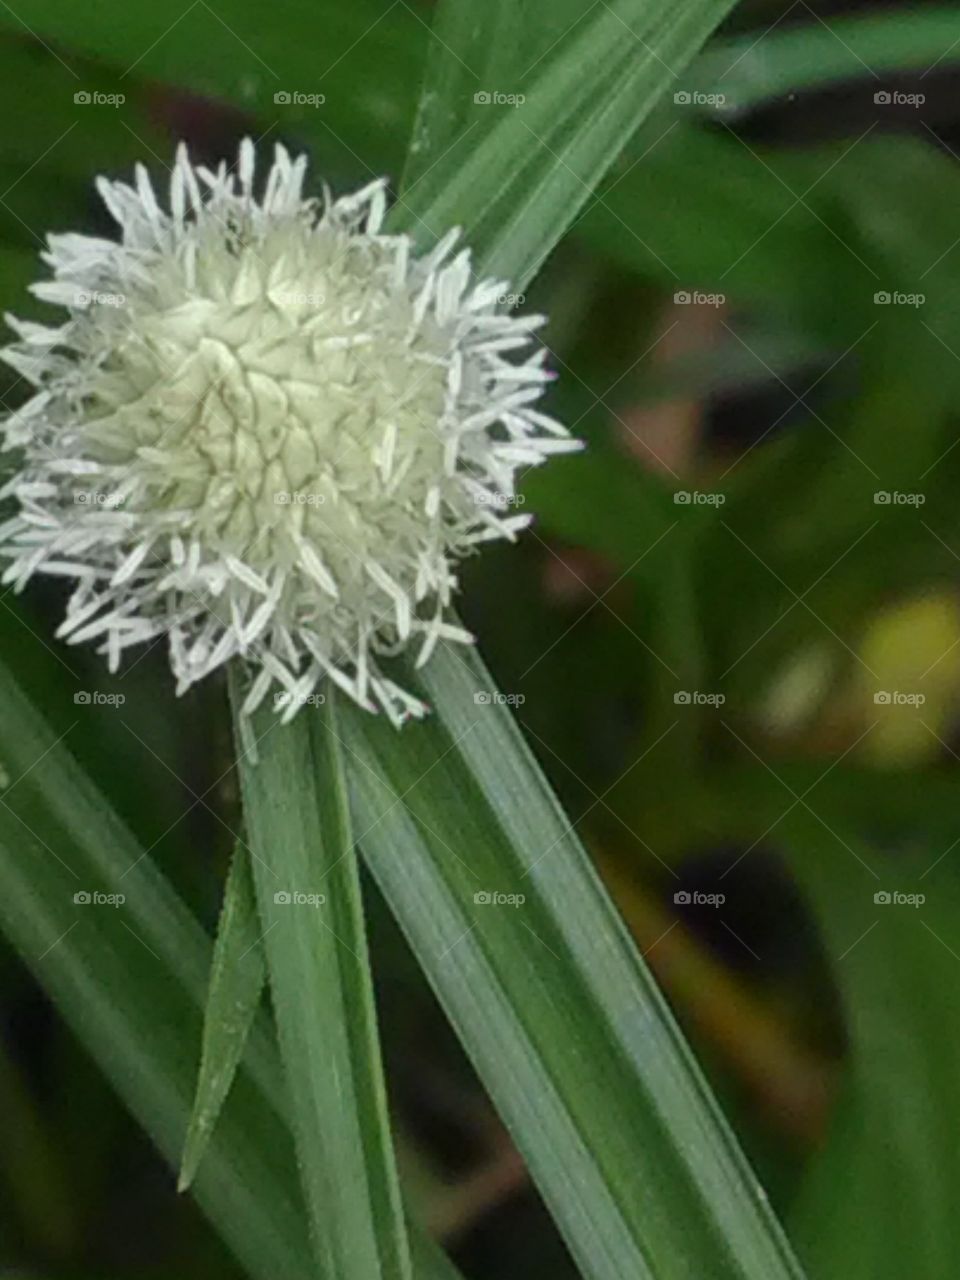 This is a very beautiful flower white smoll grass flowers.